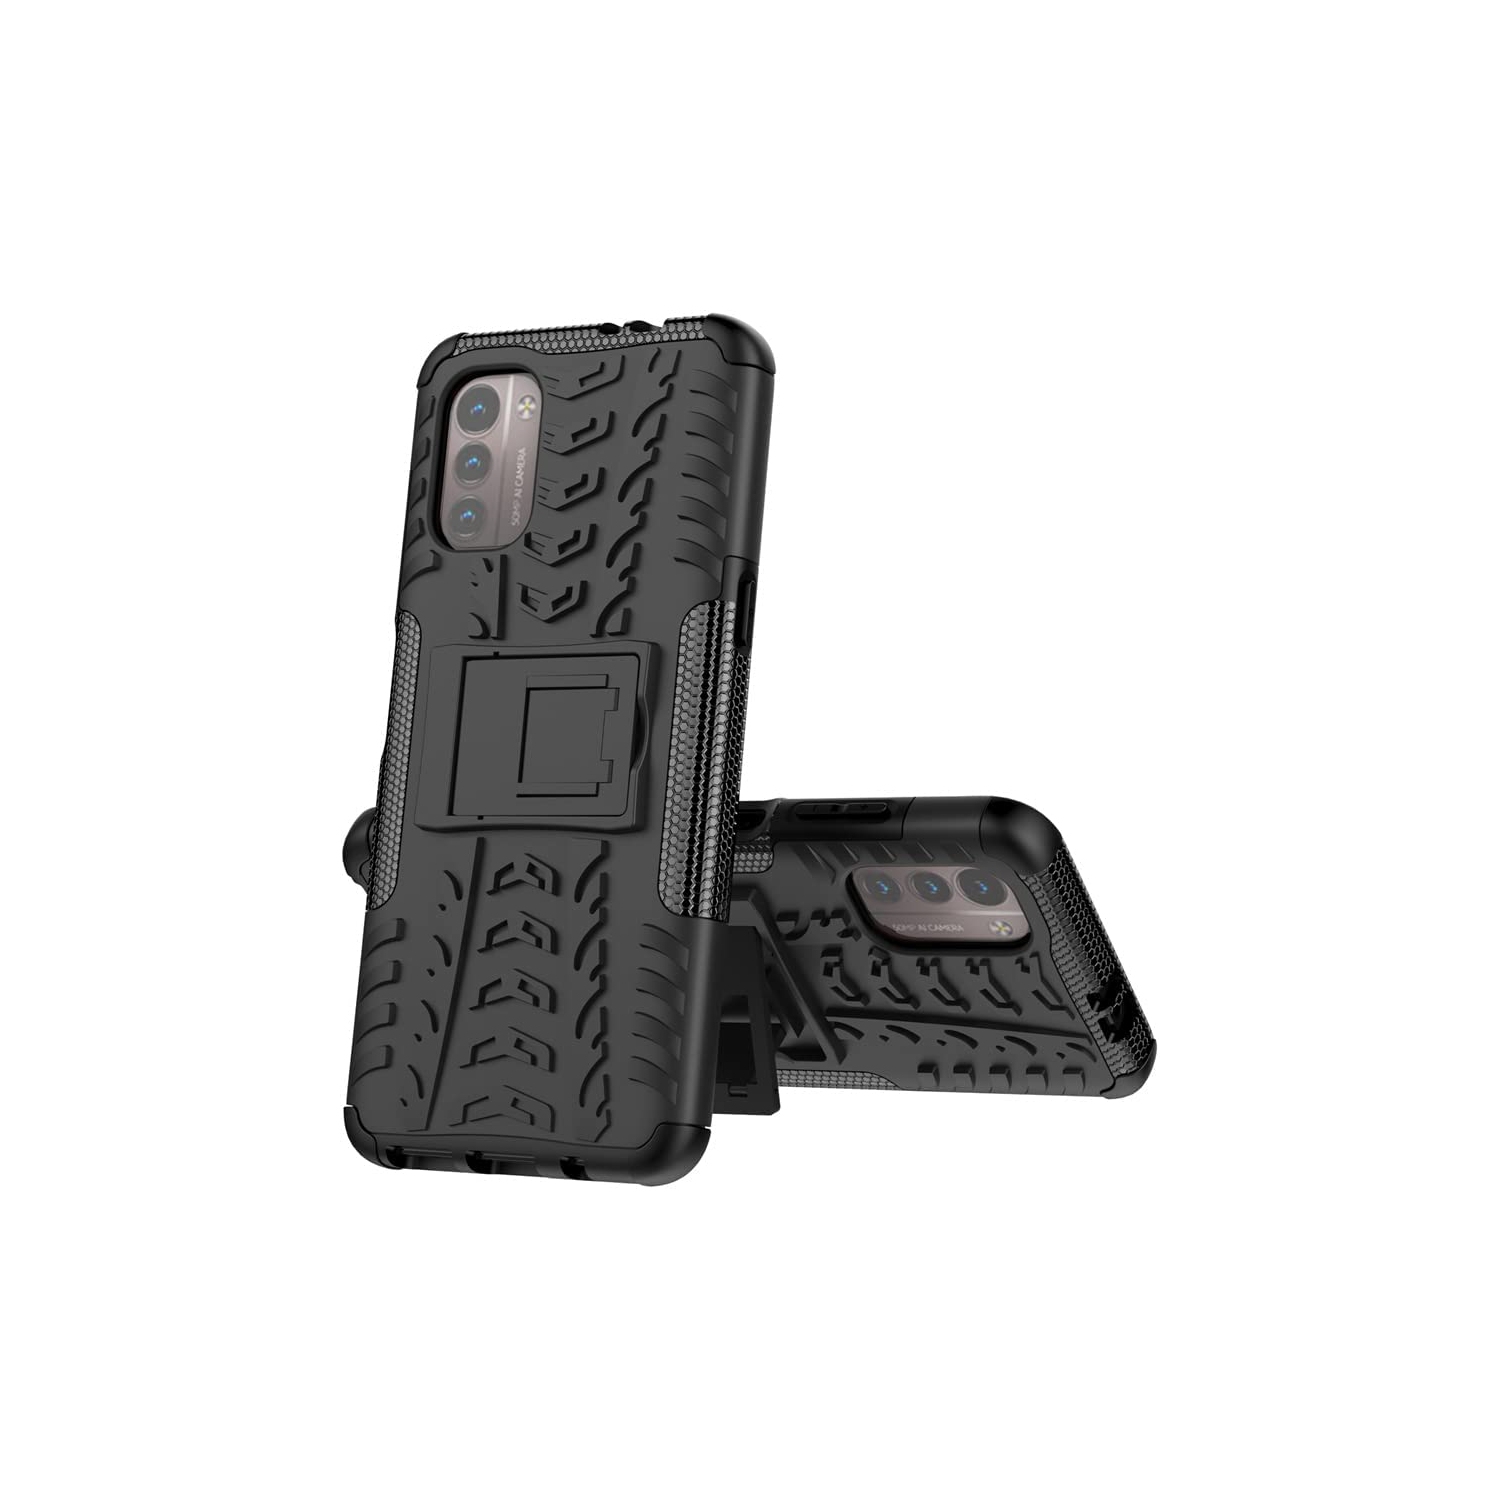 Compatible with Nokia G21 4G Case Nokia G21 4G Cover Slim Case Heavy Duty with Kickstand Dual Layer Drop